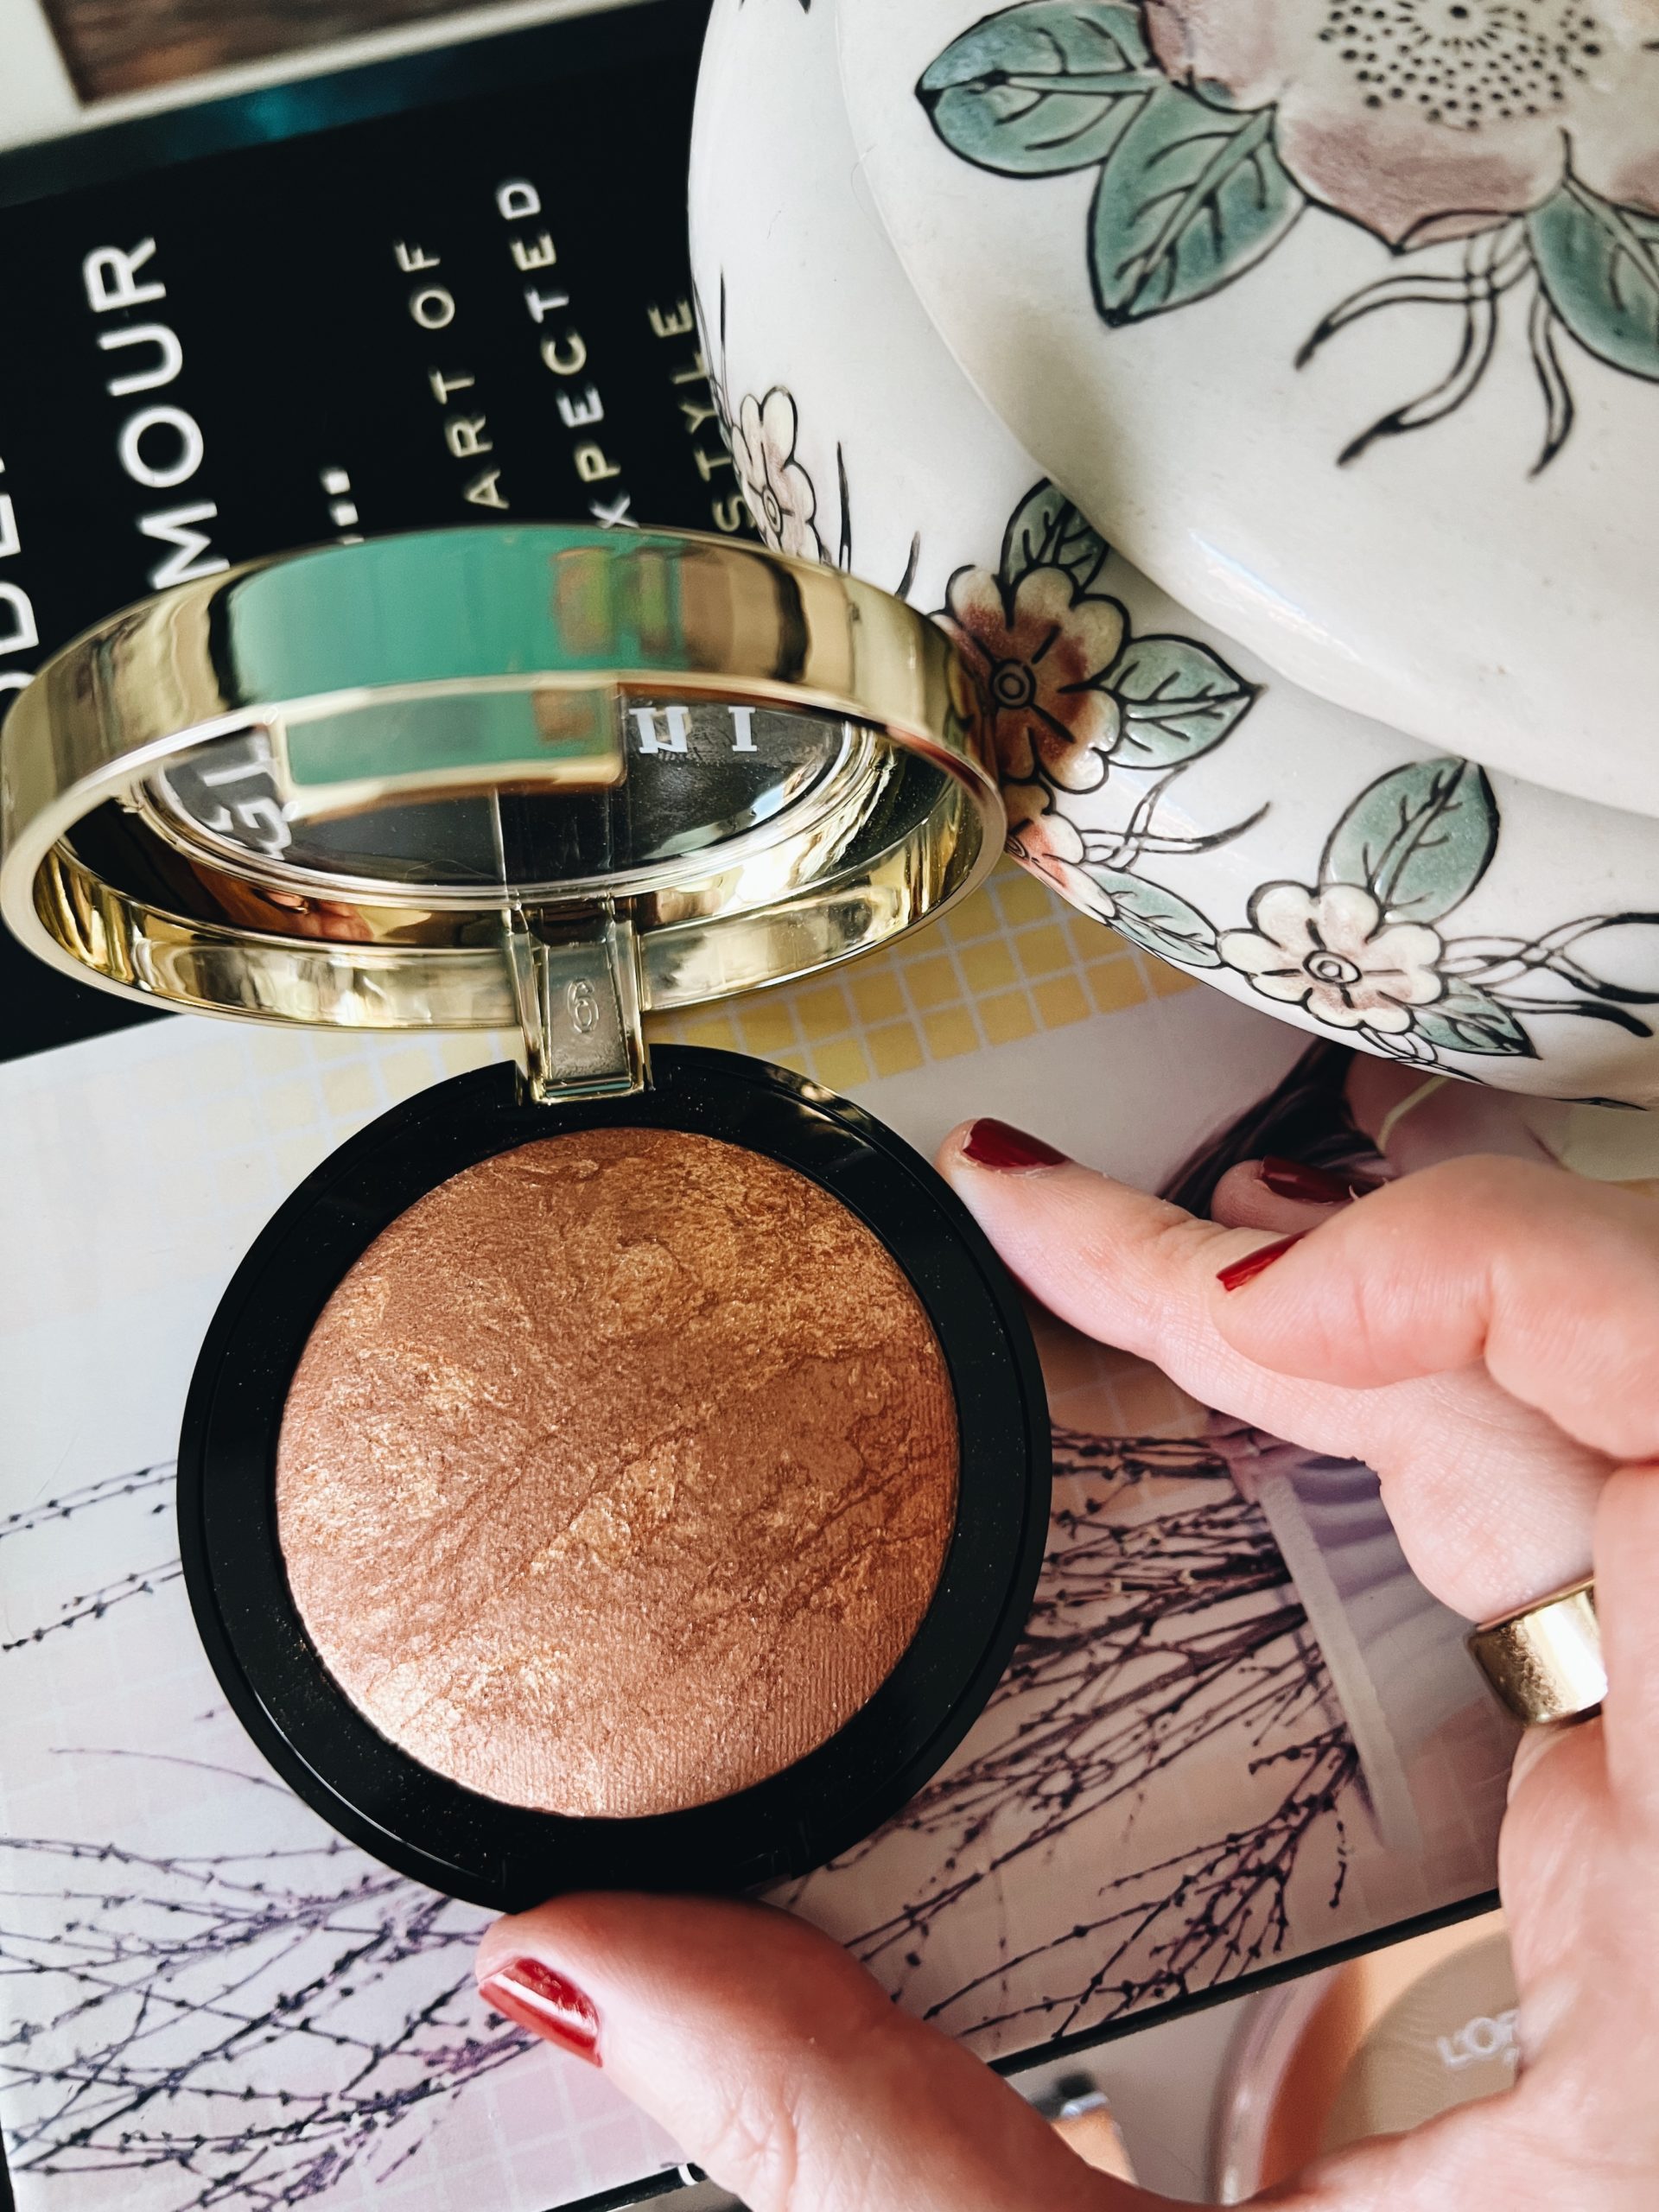 Milani Baked Bronzer in Soleil one of the drugstore bronzers